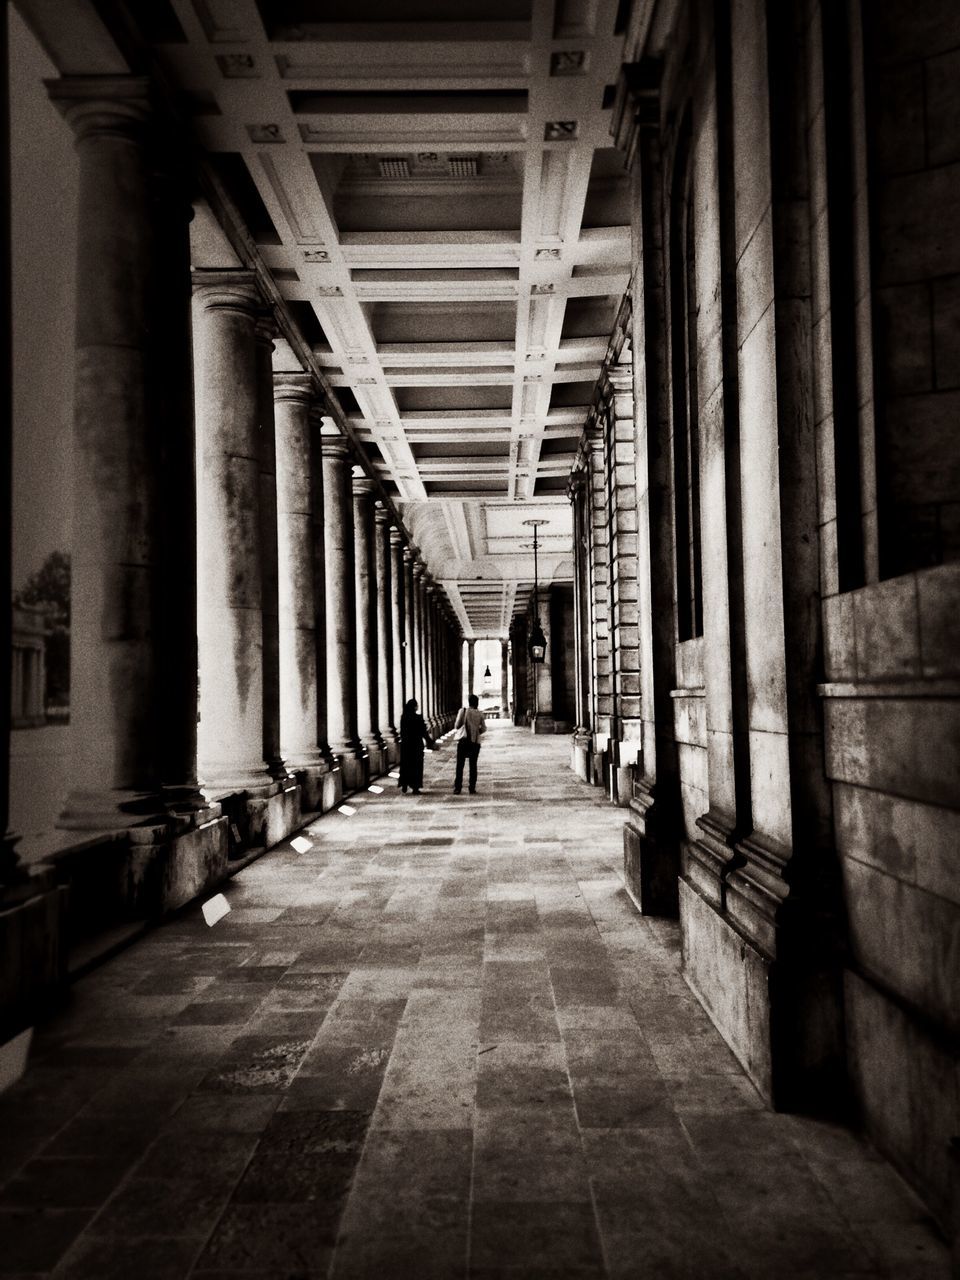 architecture, built structure, the way forward, diminishing perspective, architectural column, indoors, colonnade, vanishing point, corridor, building exterior, in a row, column, arch, history, incidental people, travel destinations, building, travel, city